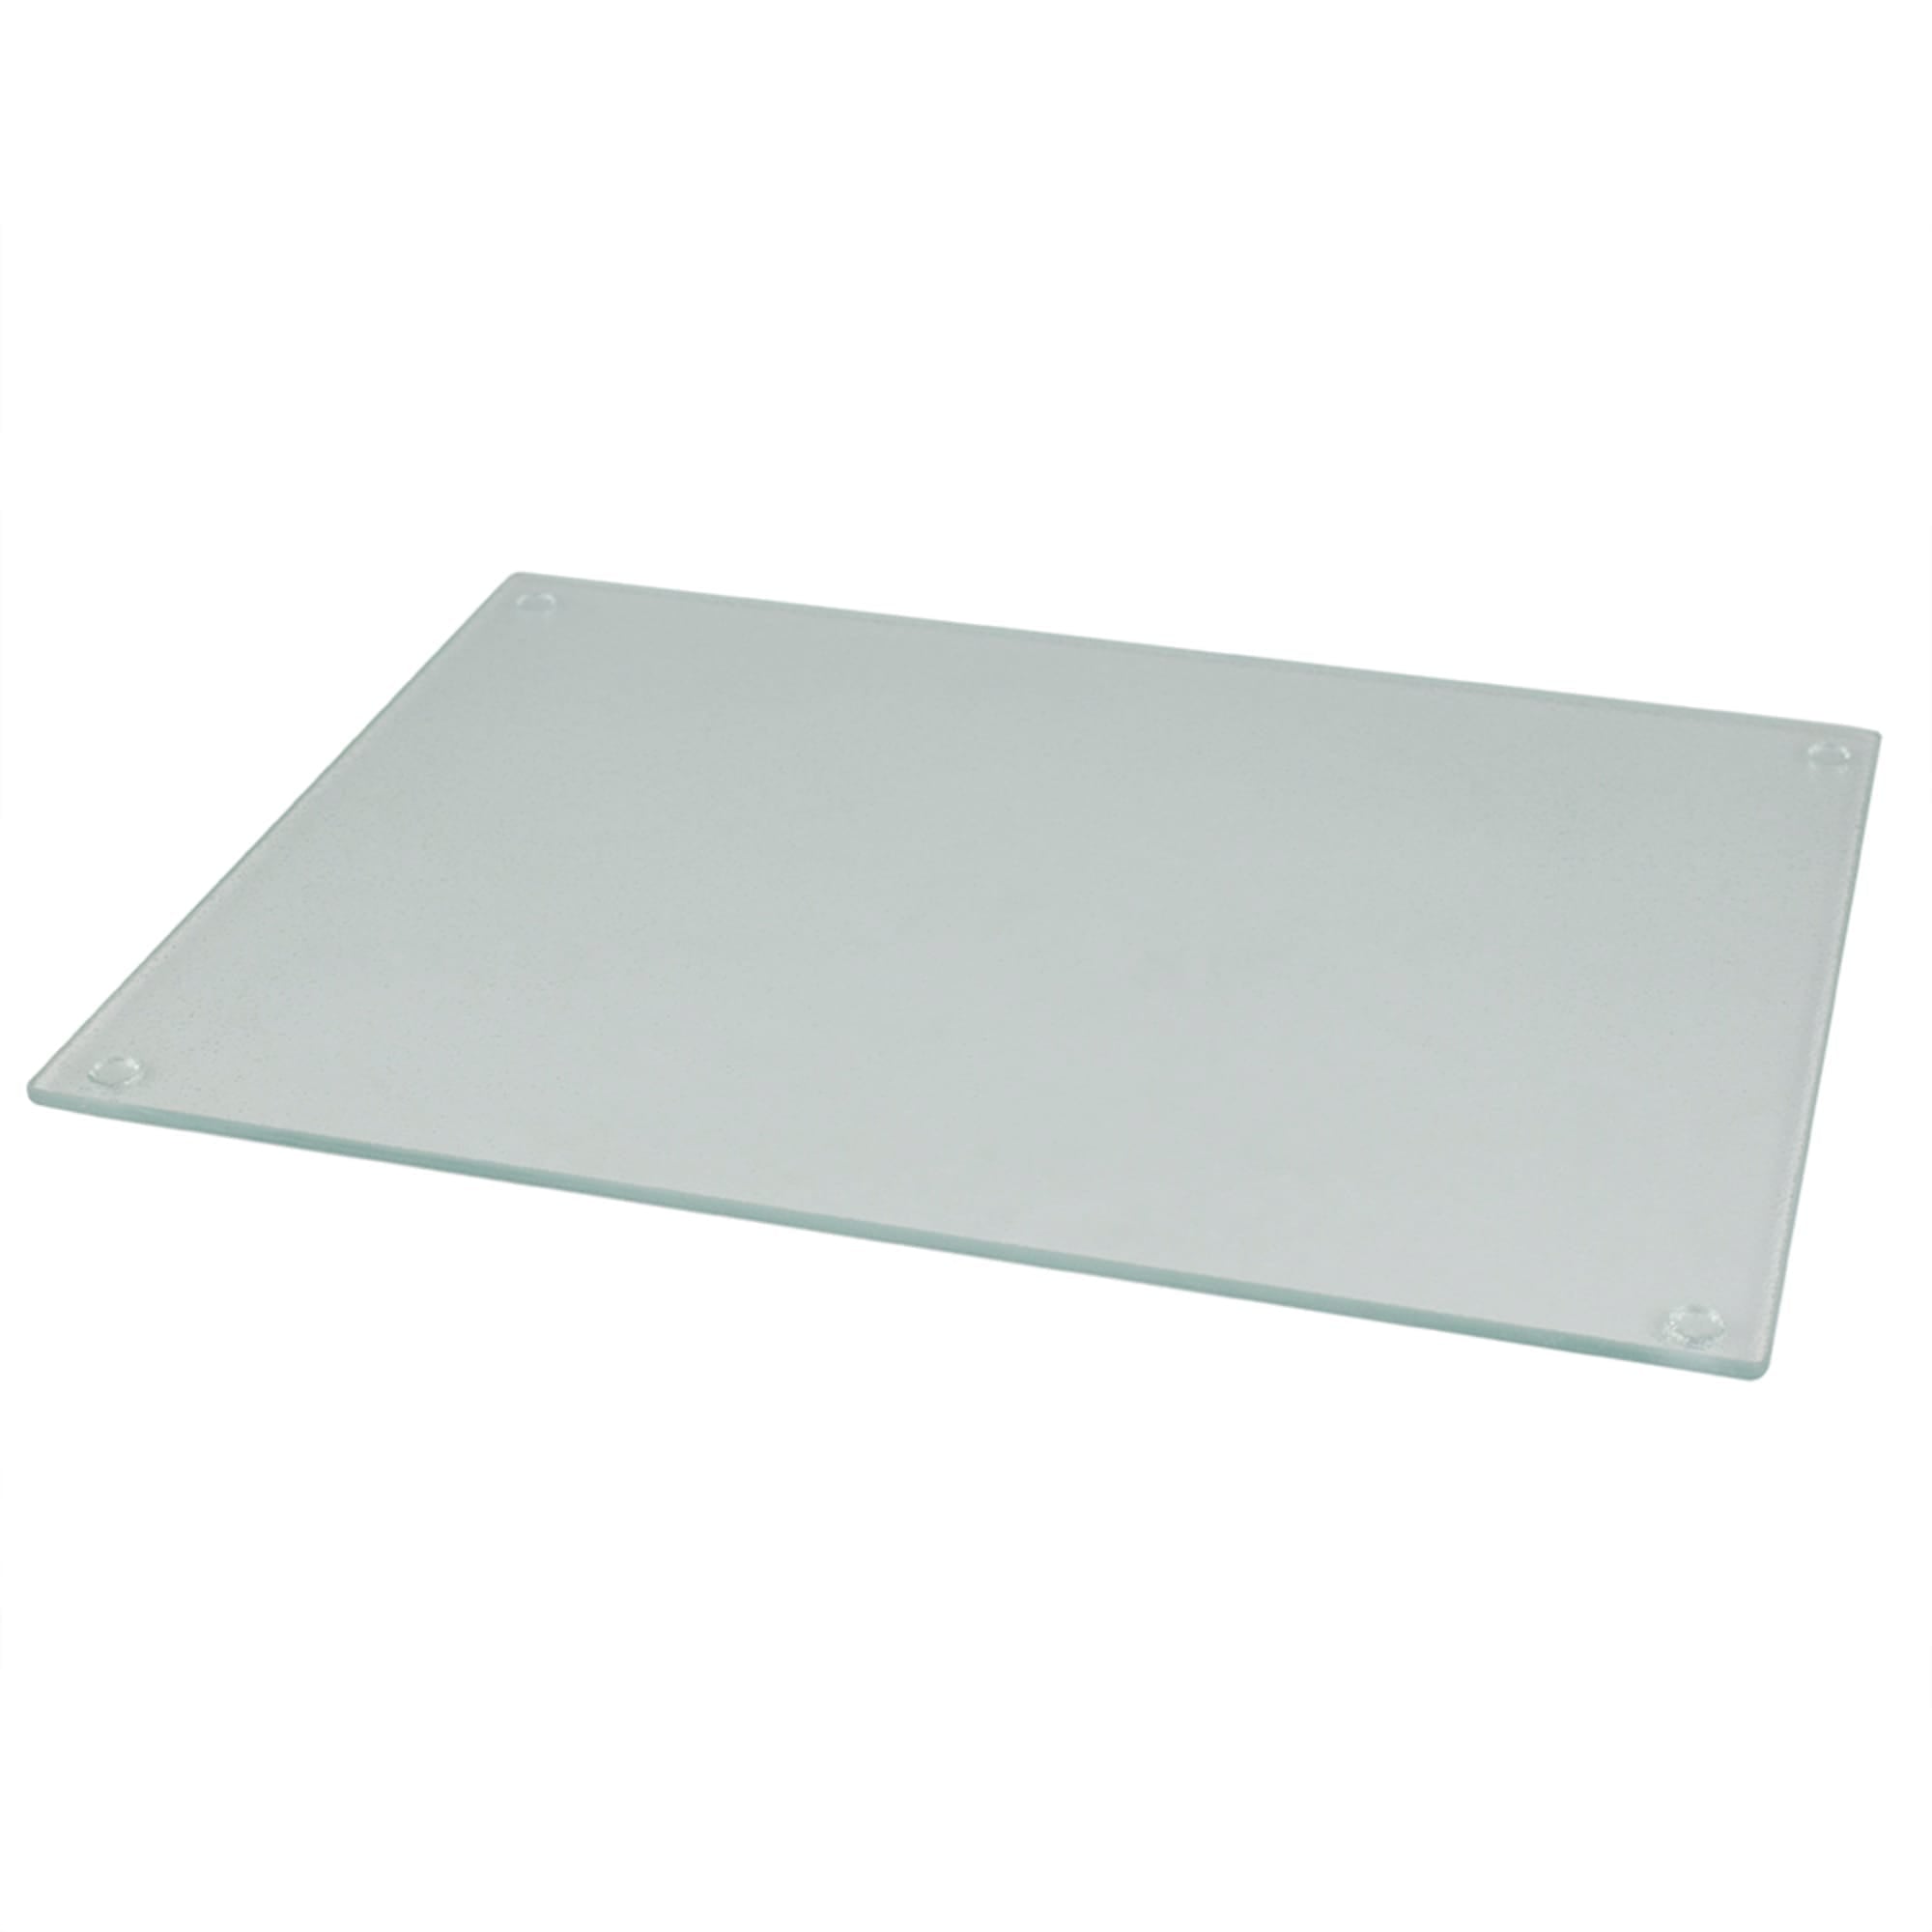 Home Basics 11.75" x 15.75" Frosted Glass Cutting Board $3.00 EACH, CASE PACK OF 12